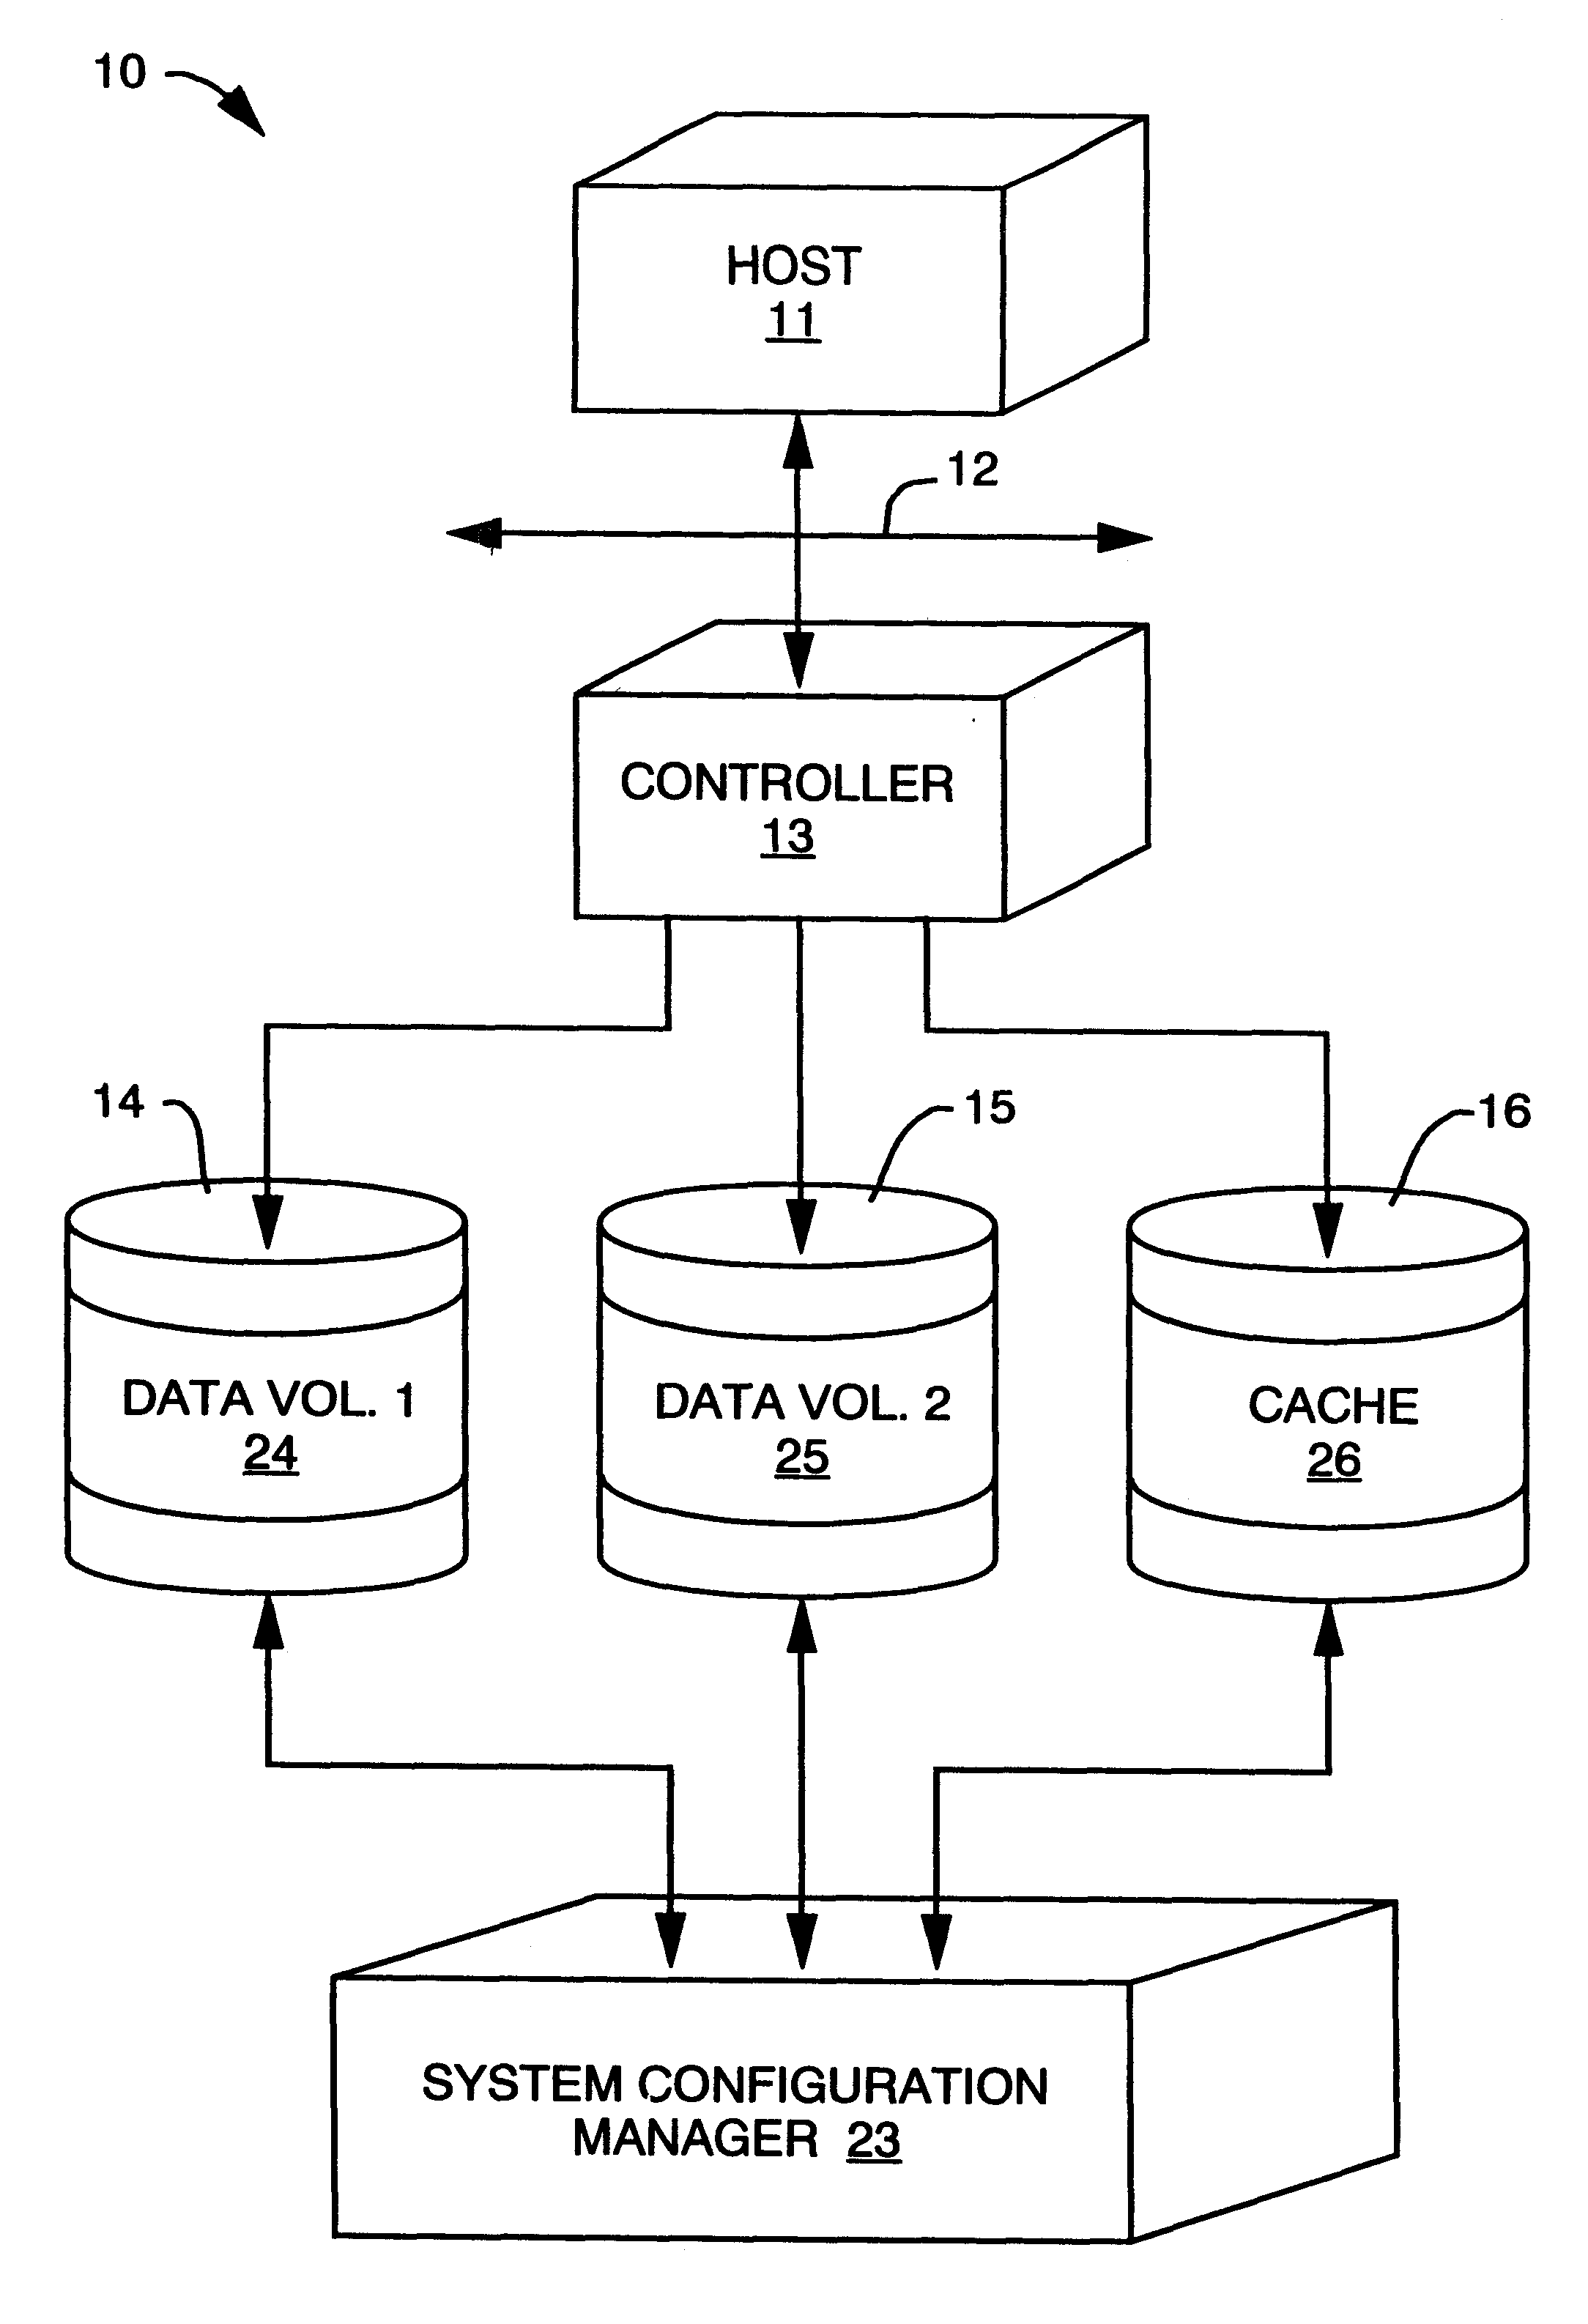 System for improving the performance of a disk storage device by reconfiguring a logical volume of data in response to the type of operations being performed